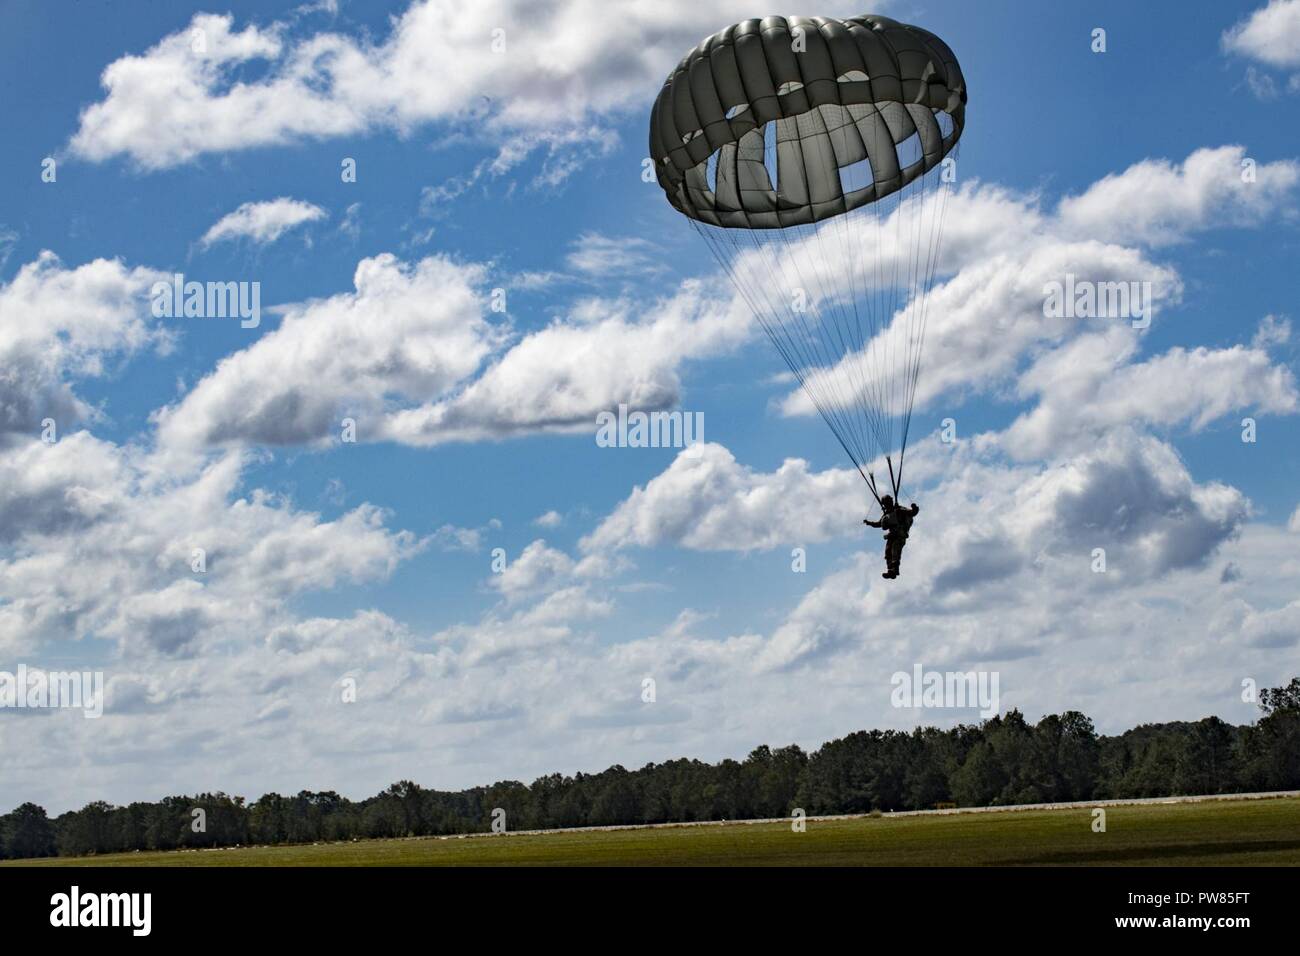 A member of the 820th Base Defense Group (BDG) descends during a static-line jump, Oct. 3, 2017, at the Lee Fulp drop zone in Tifton, Ga. The 820th Combat Operations Squadron’s four-person shop of parachute riggers are responsible for ensuring every 820th BDG parachute is serviceable, while also ensuring ground safety at the drop zone. The team has packed and inspected more than 490 parachutes in 2017. Stock Photo